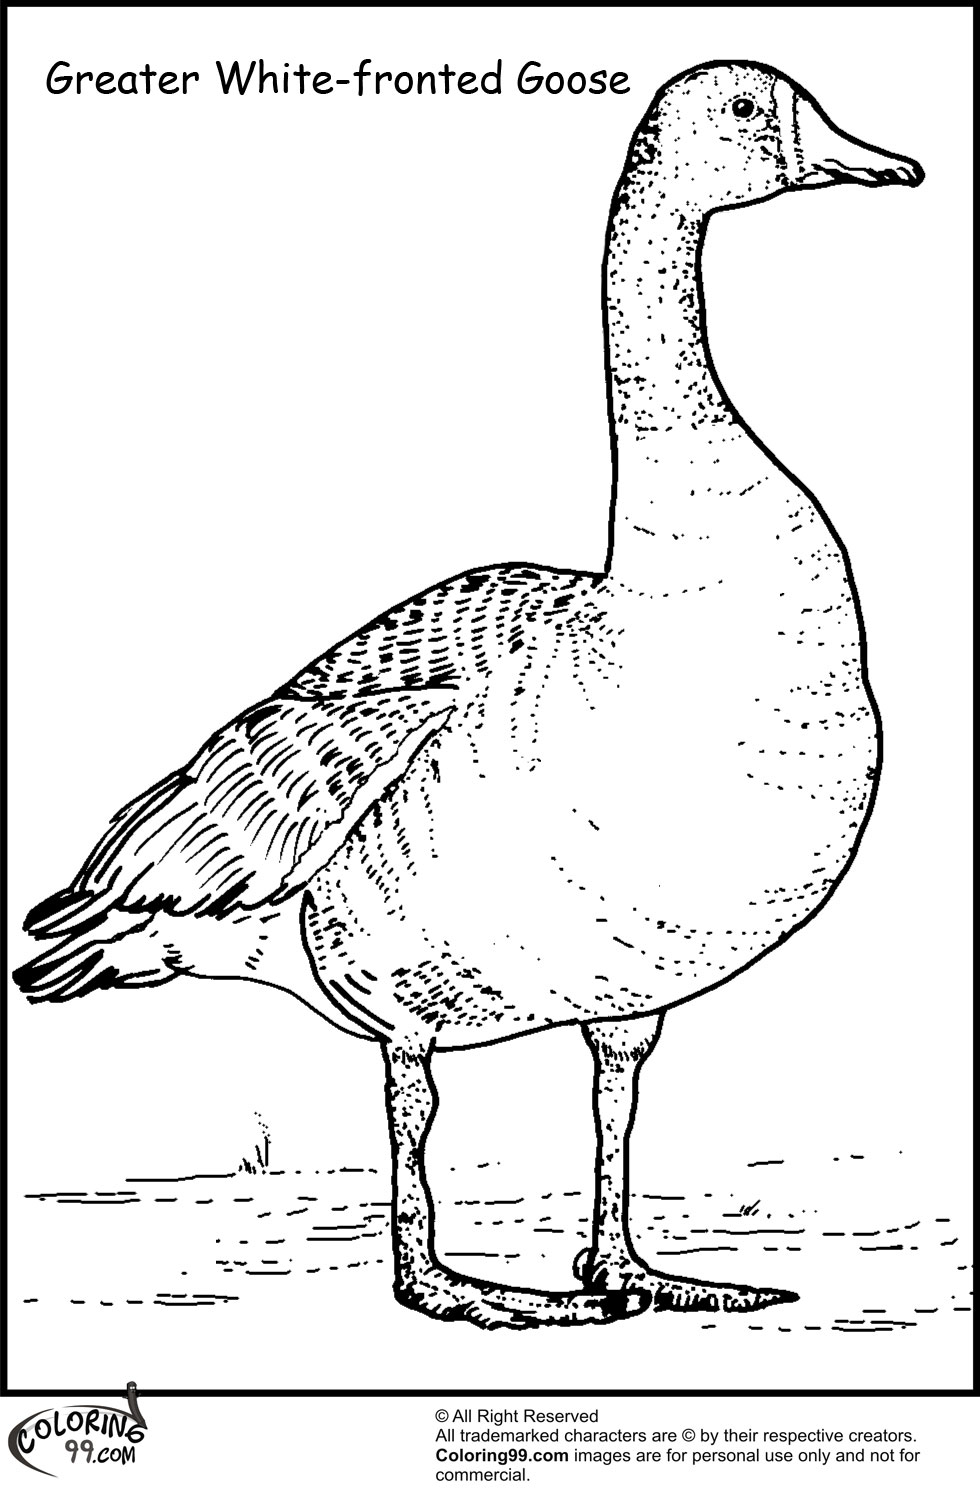 Geese Migration coloring #2, Download drawings